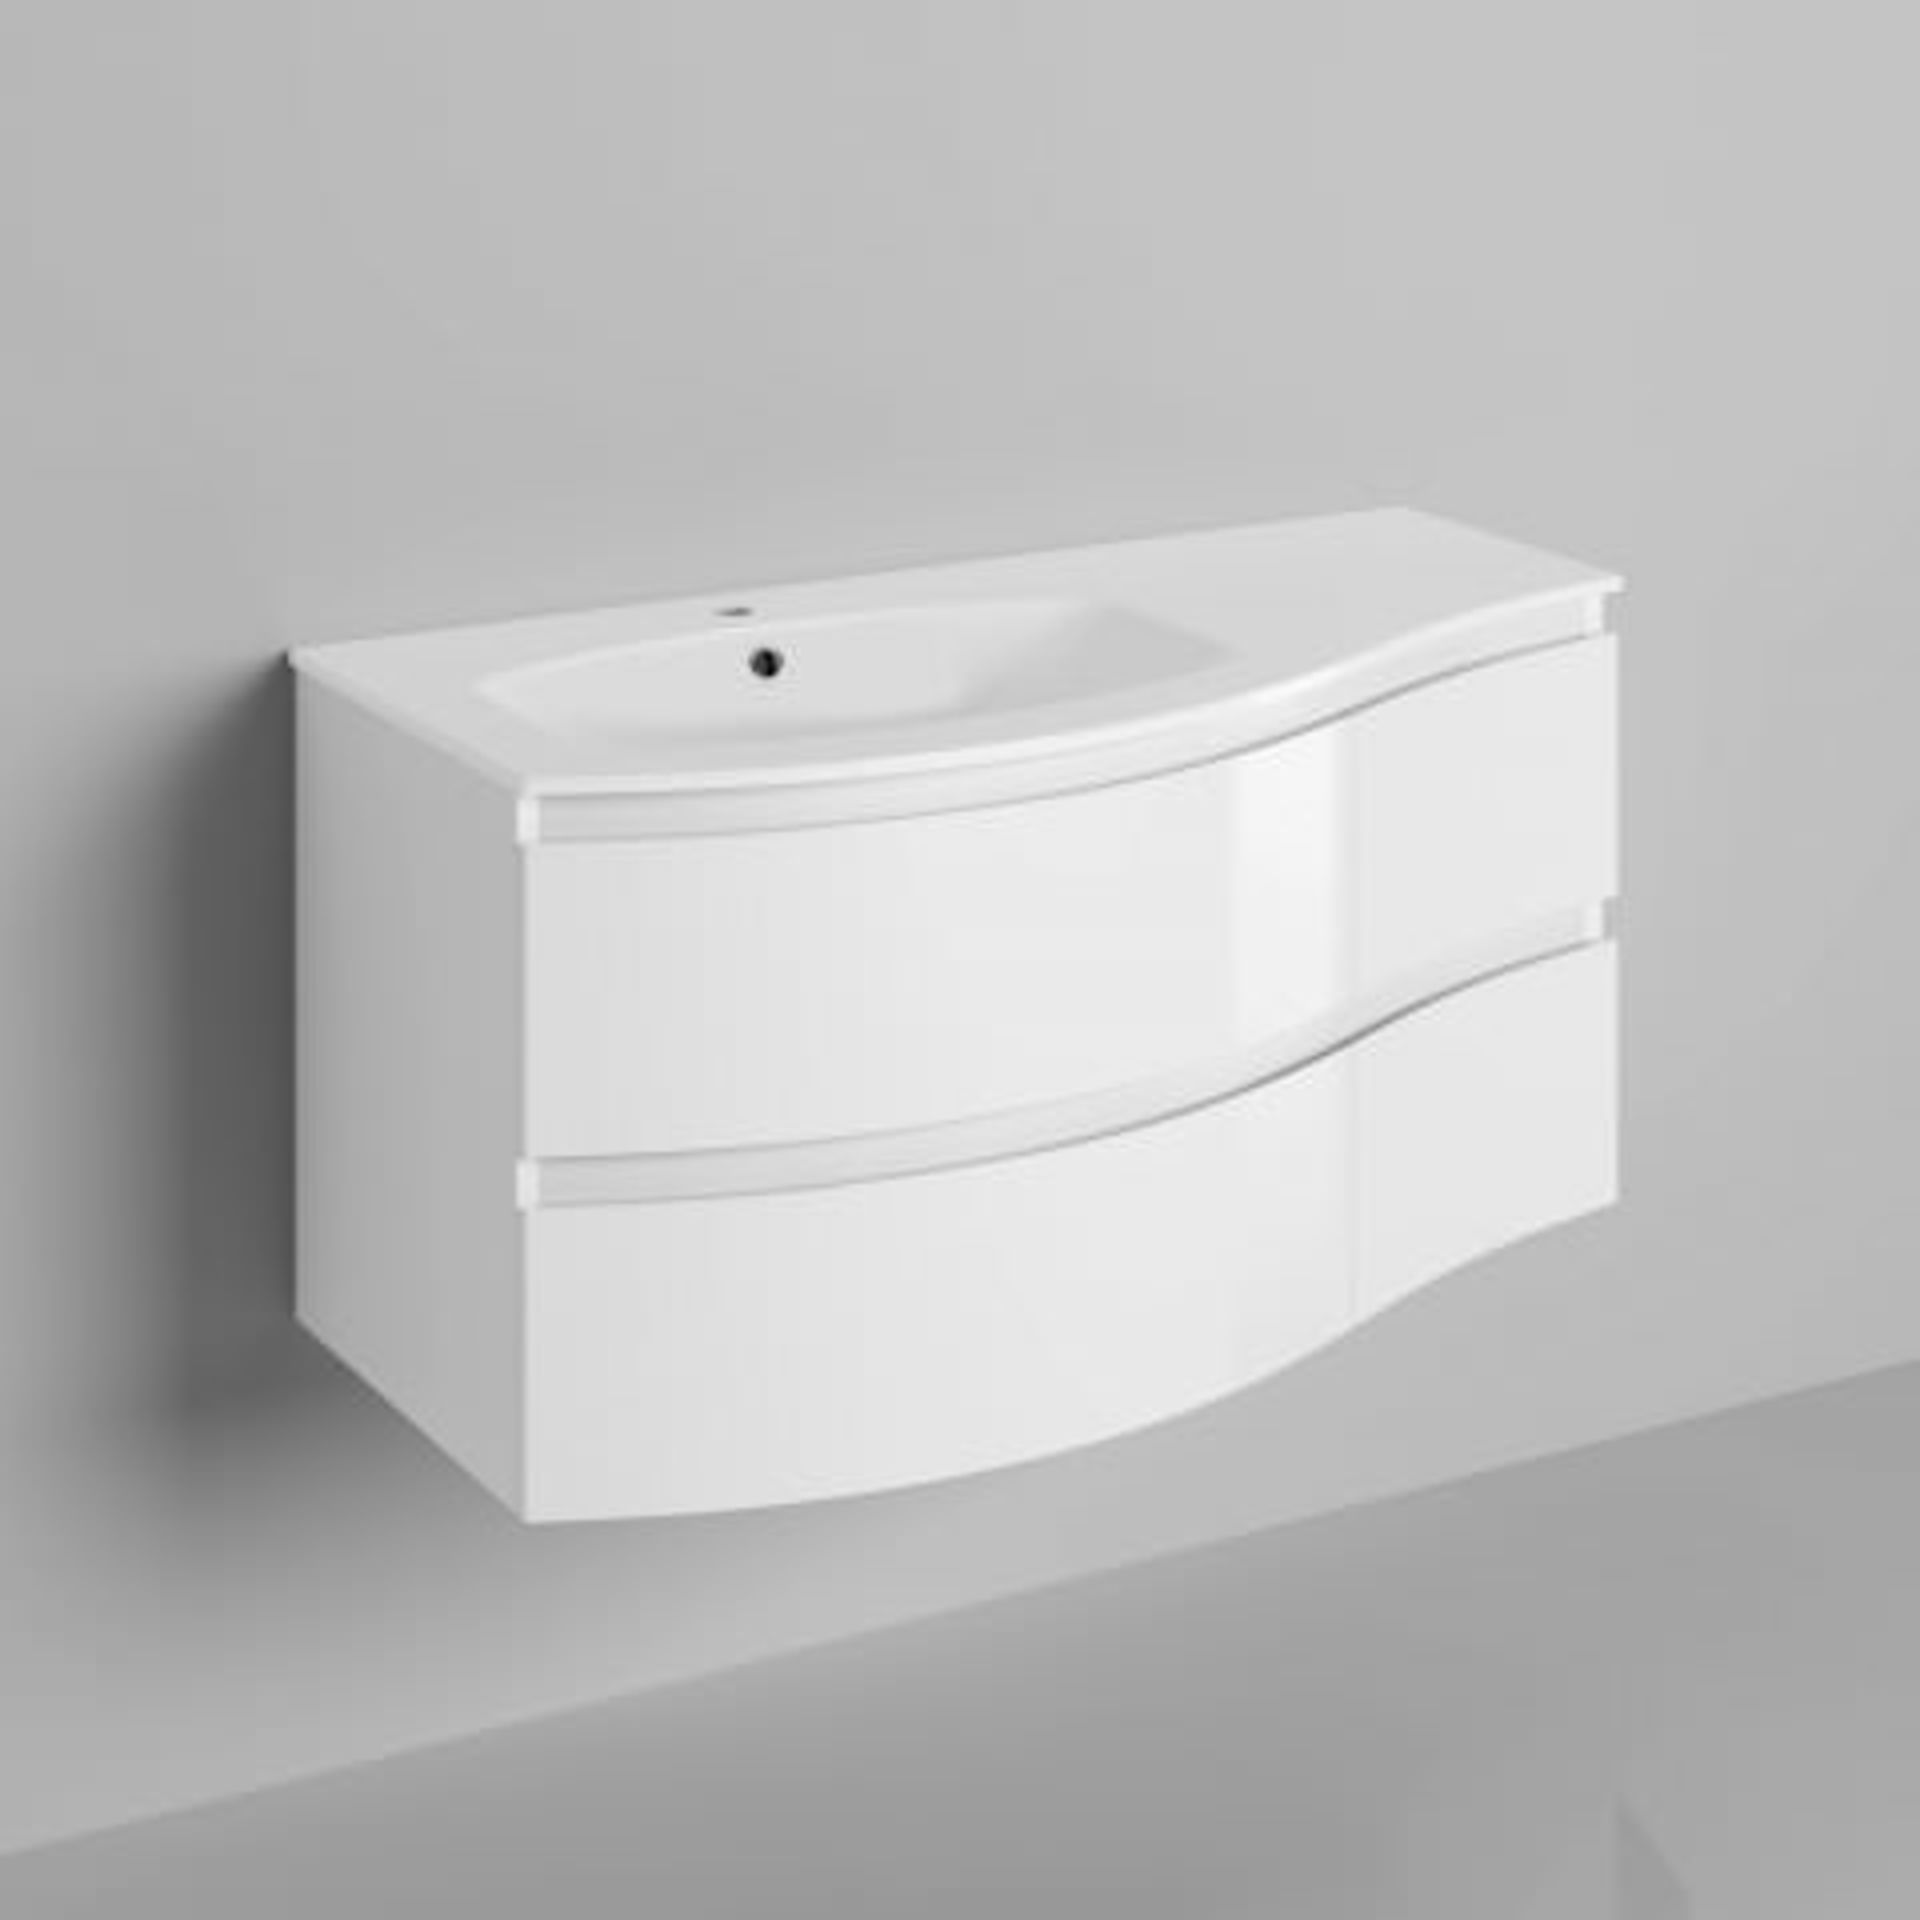 1040mm Amelie High Gloss White Curved Vanity Unit - Left Hand - Wall Hung. RRP £1,499.COMES ... - Image 4 of 4